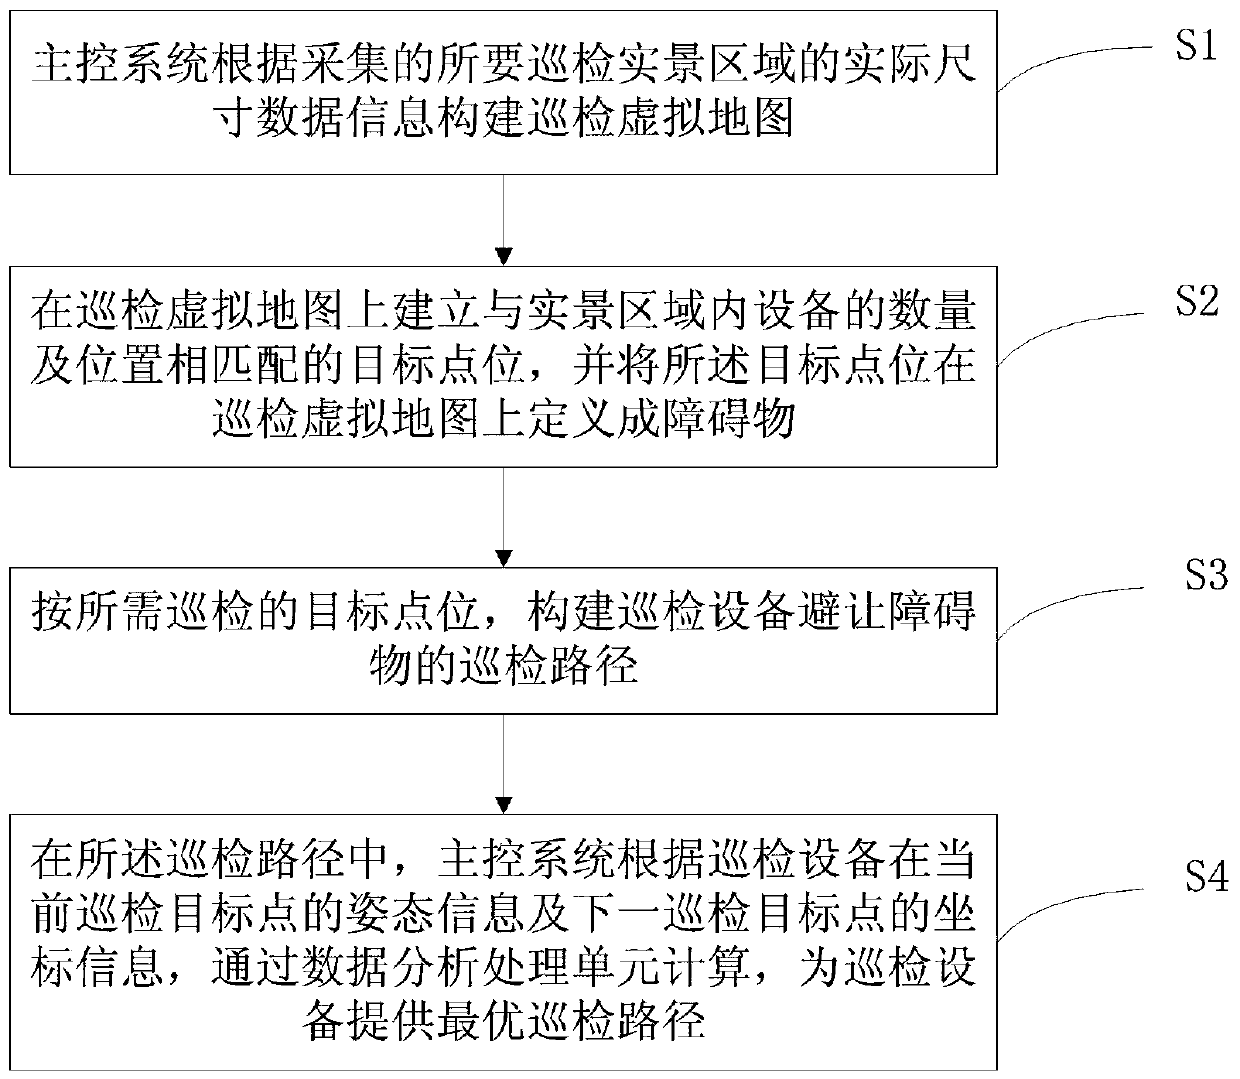 Equipment inspection method in area and inspection equipment